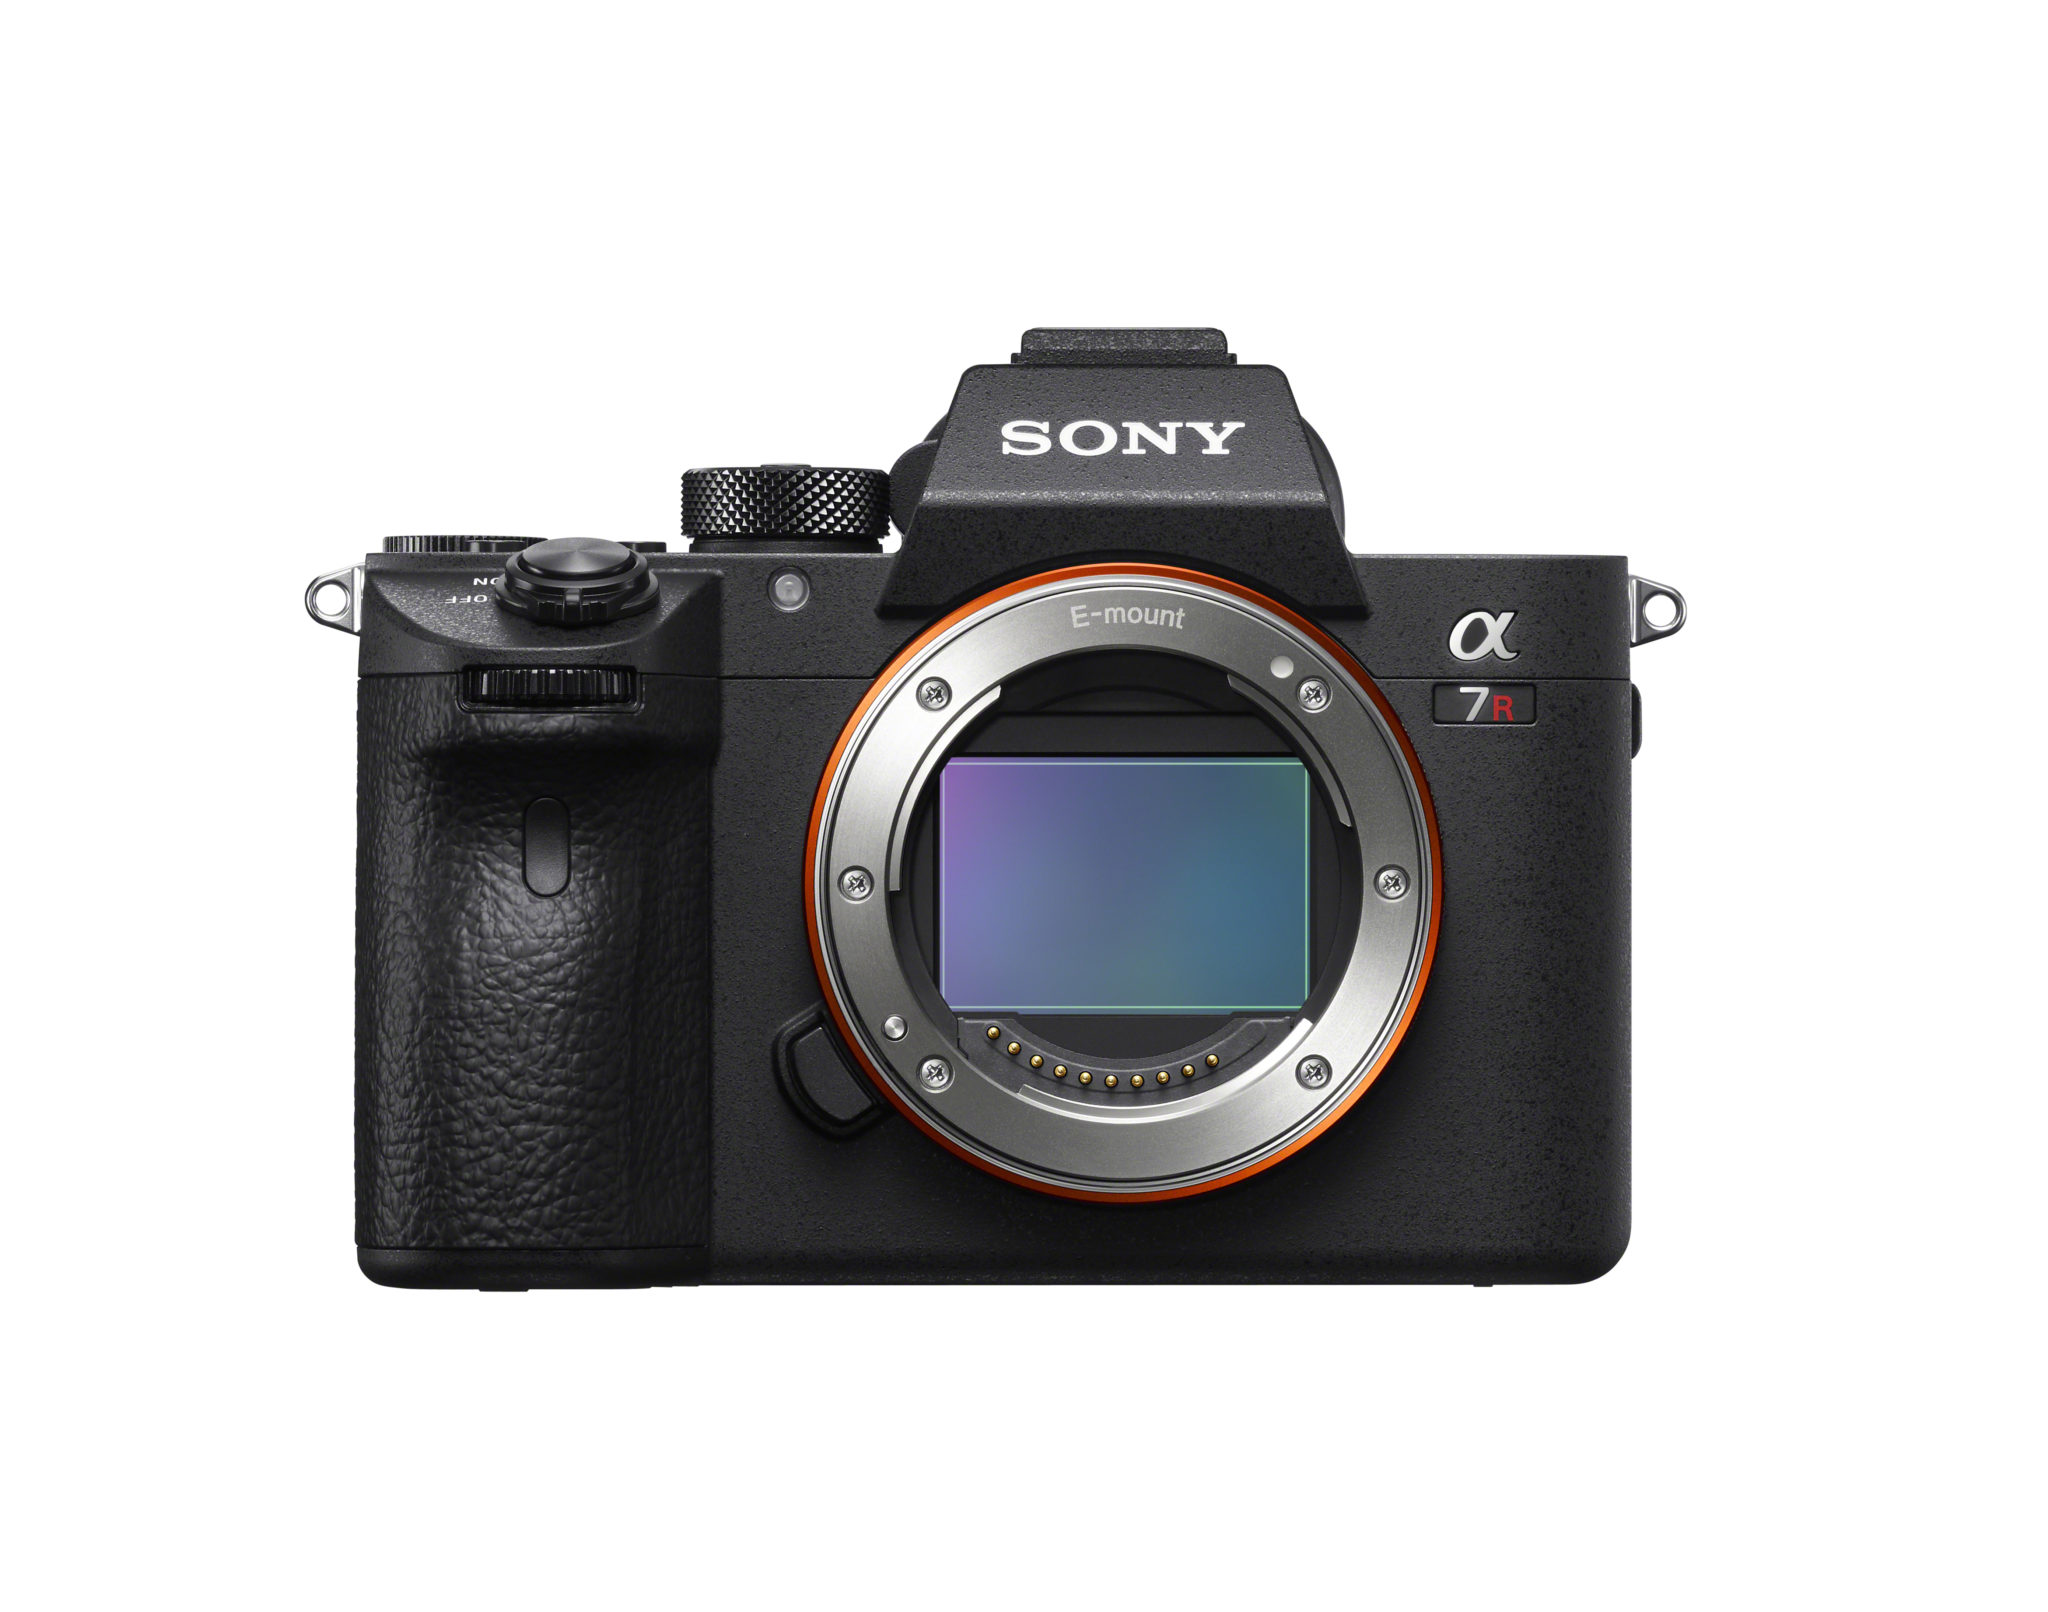 Opinion: The Sony a7r III is Pretty Much the New Canon 5D for Pros